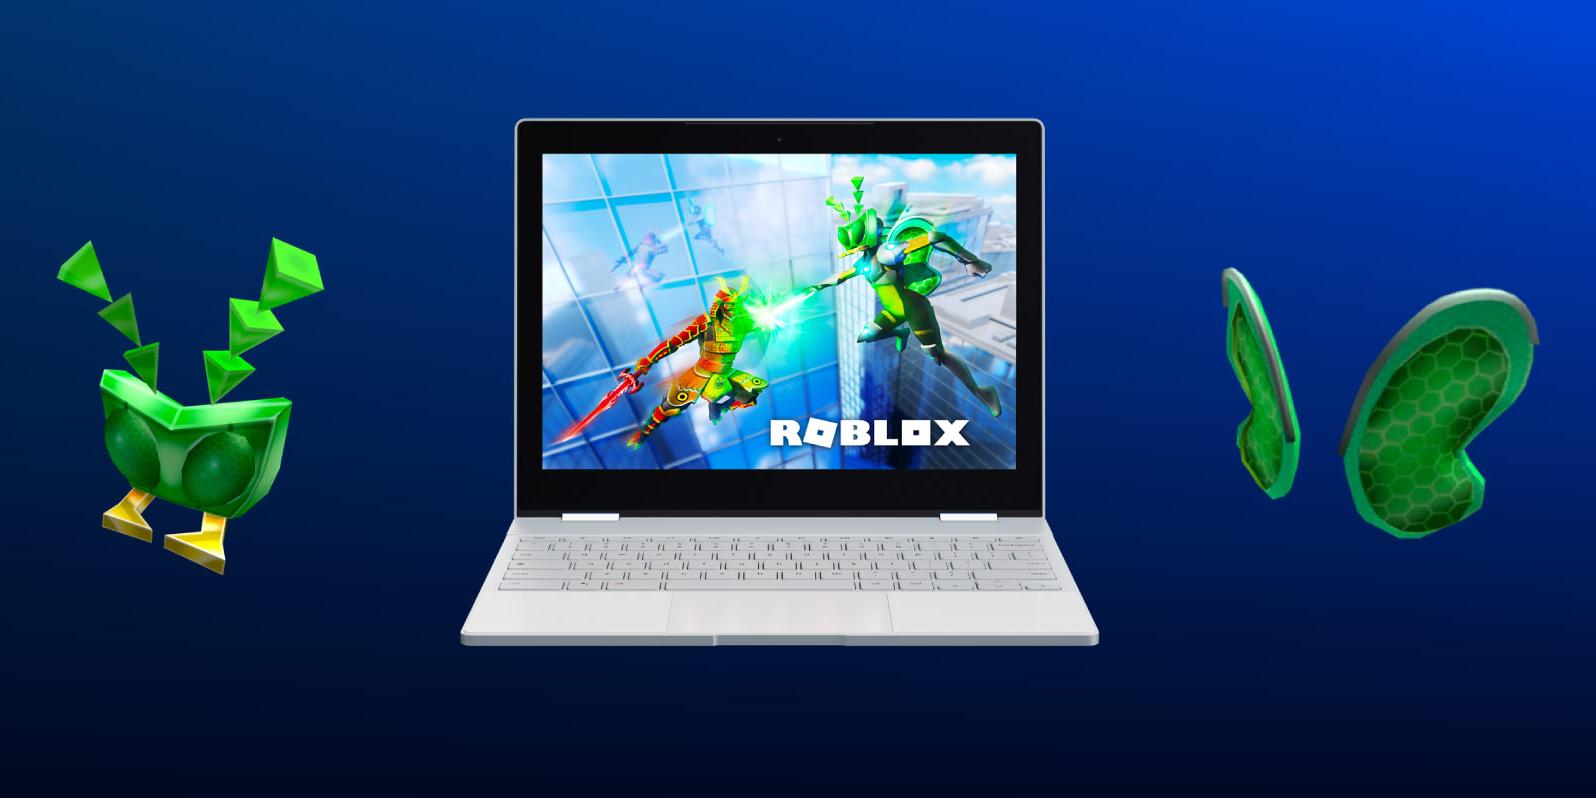 How to Play Roblox on a Chromebook